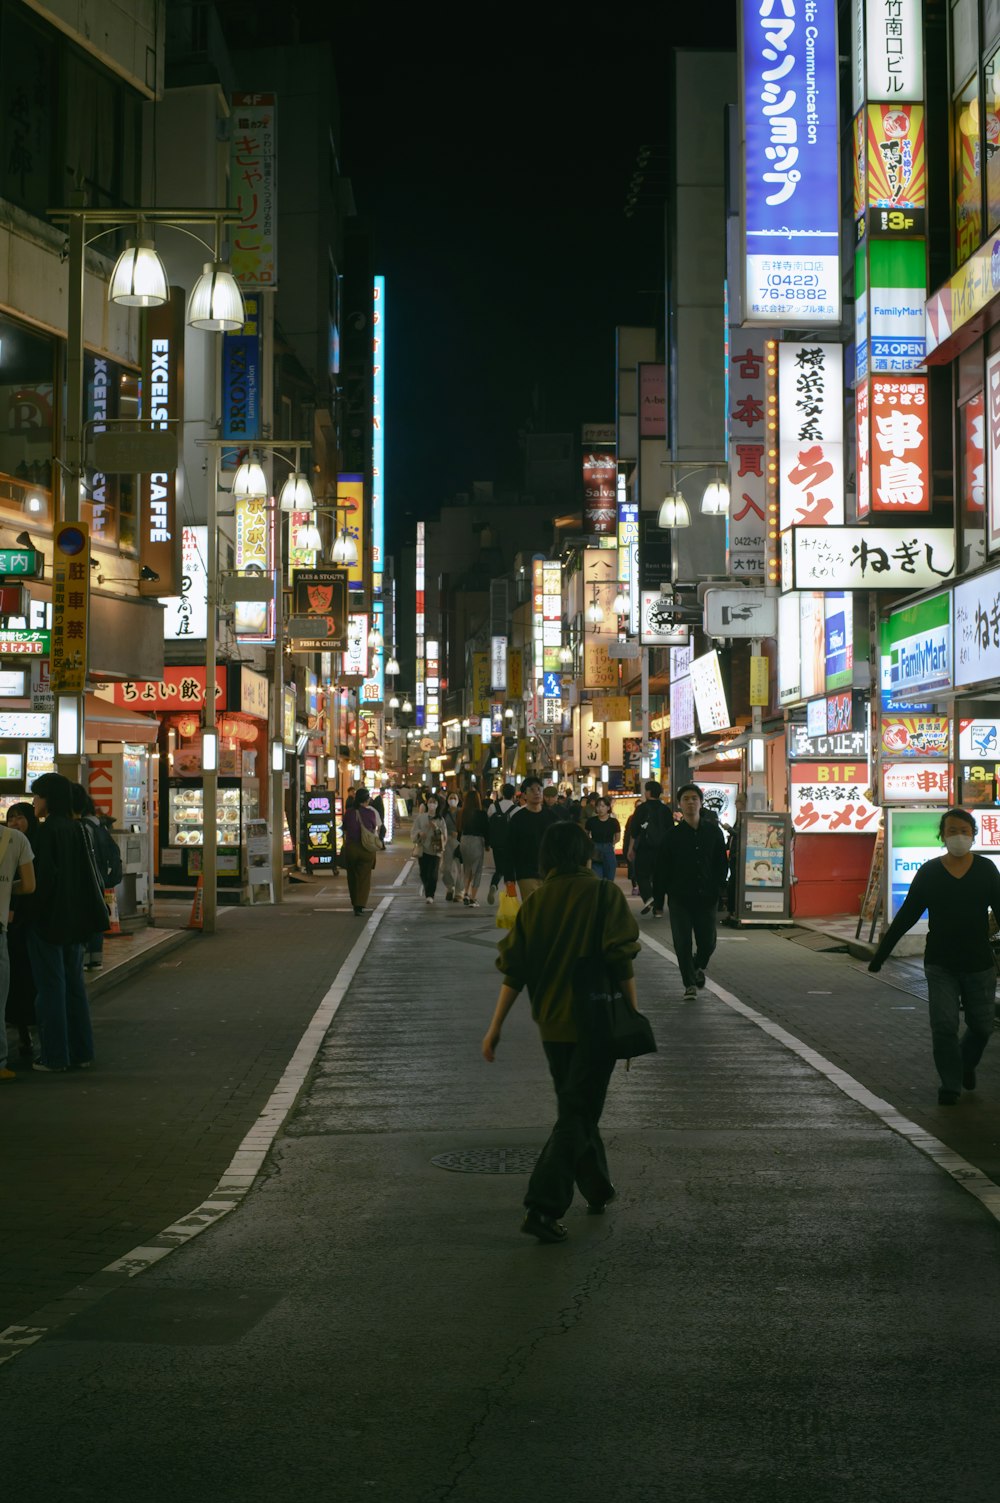 a crowded city street at night with people walking